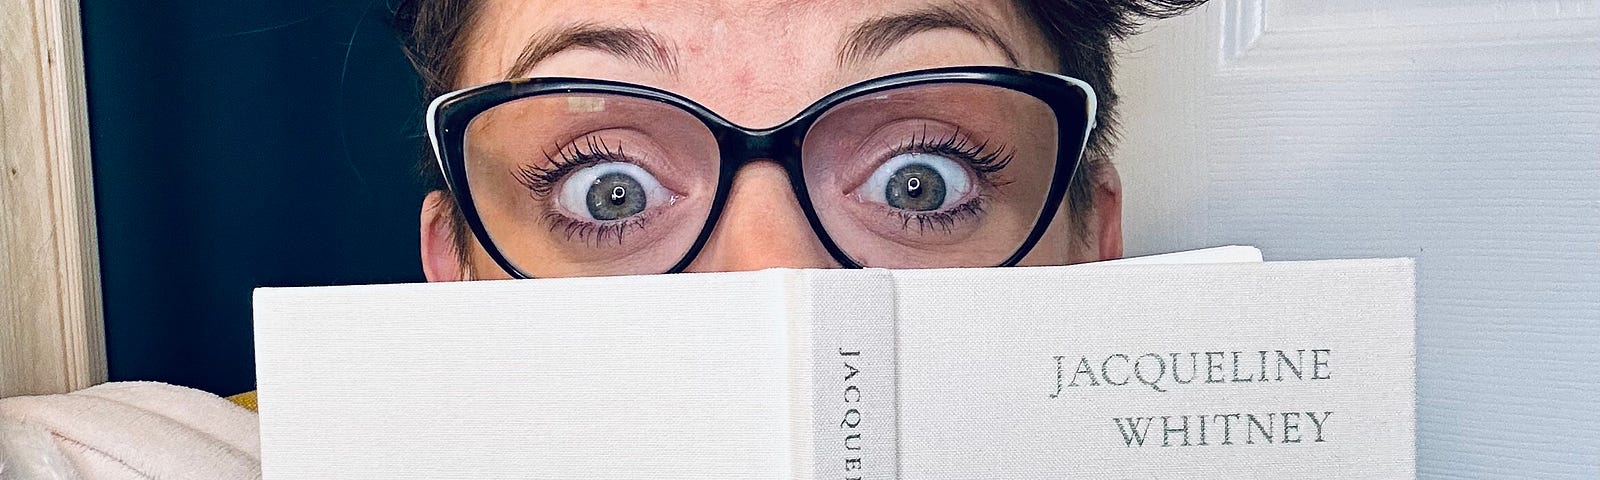 Photo of GiGi hiding her face behind a book titled, “ALL THAT YOU DESERVE”, with excited eyes peeking from behind the top.